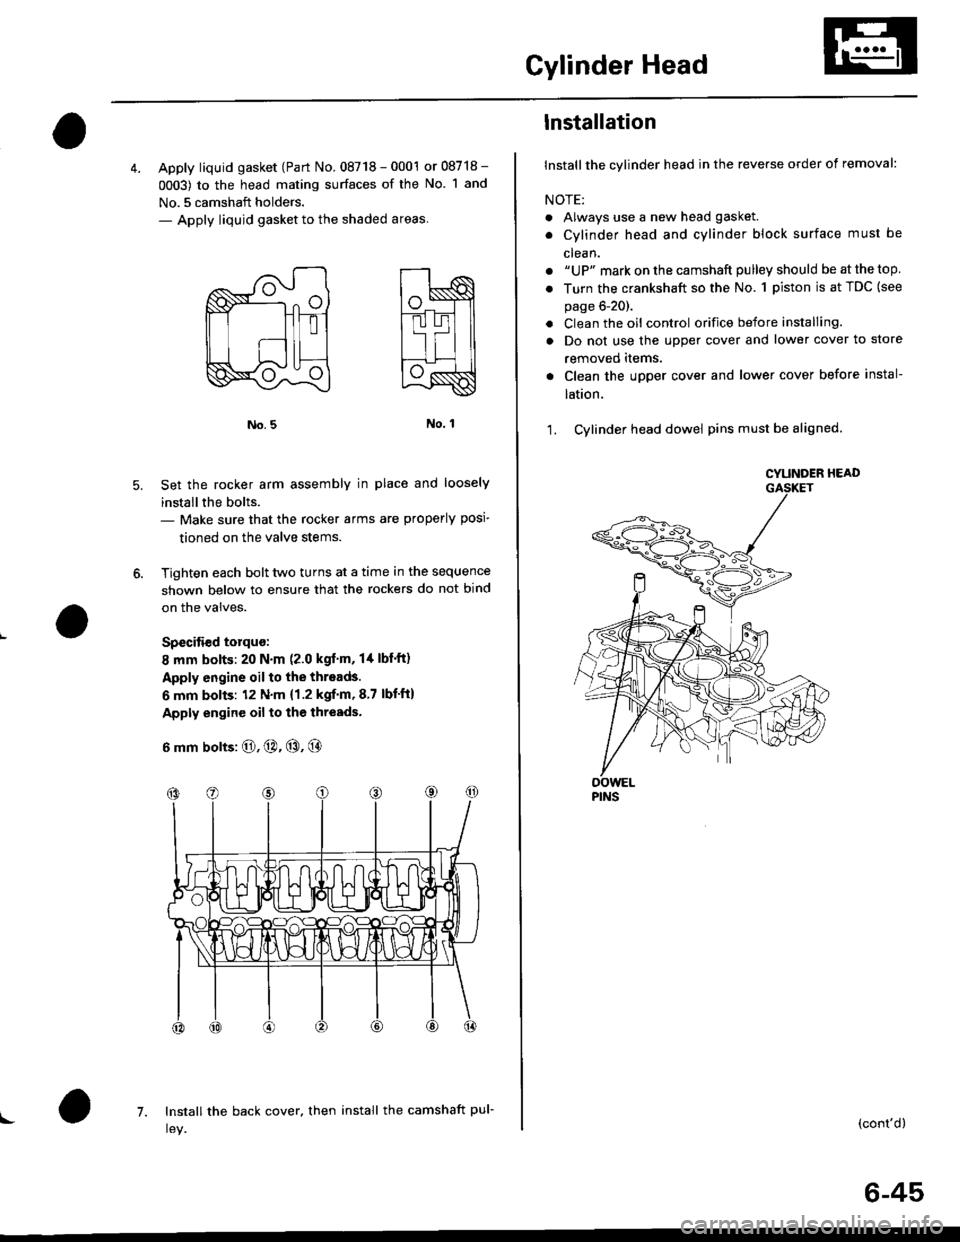 HONDA CIVIC 1999 6.G User Guide Cylinder Head
4. Apply liquid gasket (Part No. 08718 - 0001 or 08718 -
0003) to the head mating surfaces of the No. 1 and
No.5 camshaft holders.- Apply liquid gasket to the shaded areas
Set the rocker